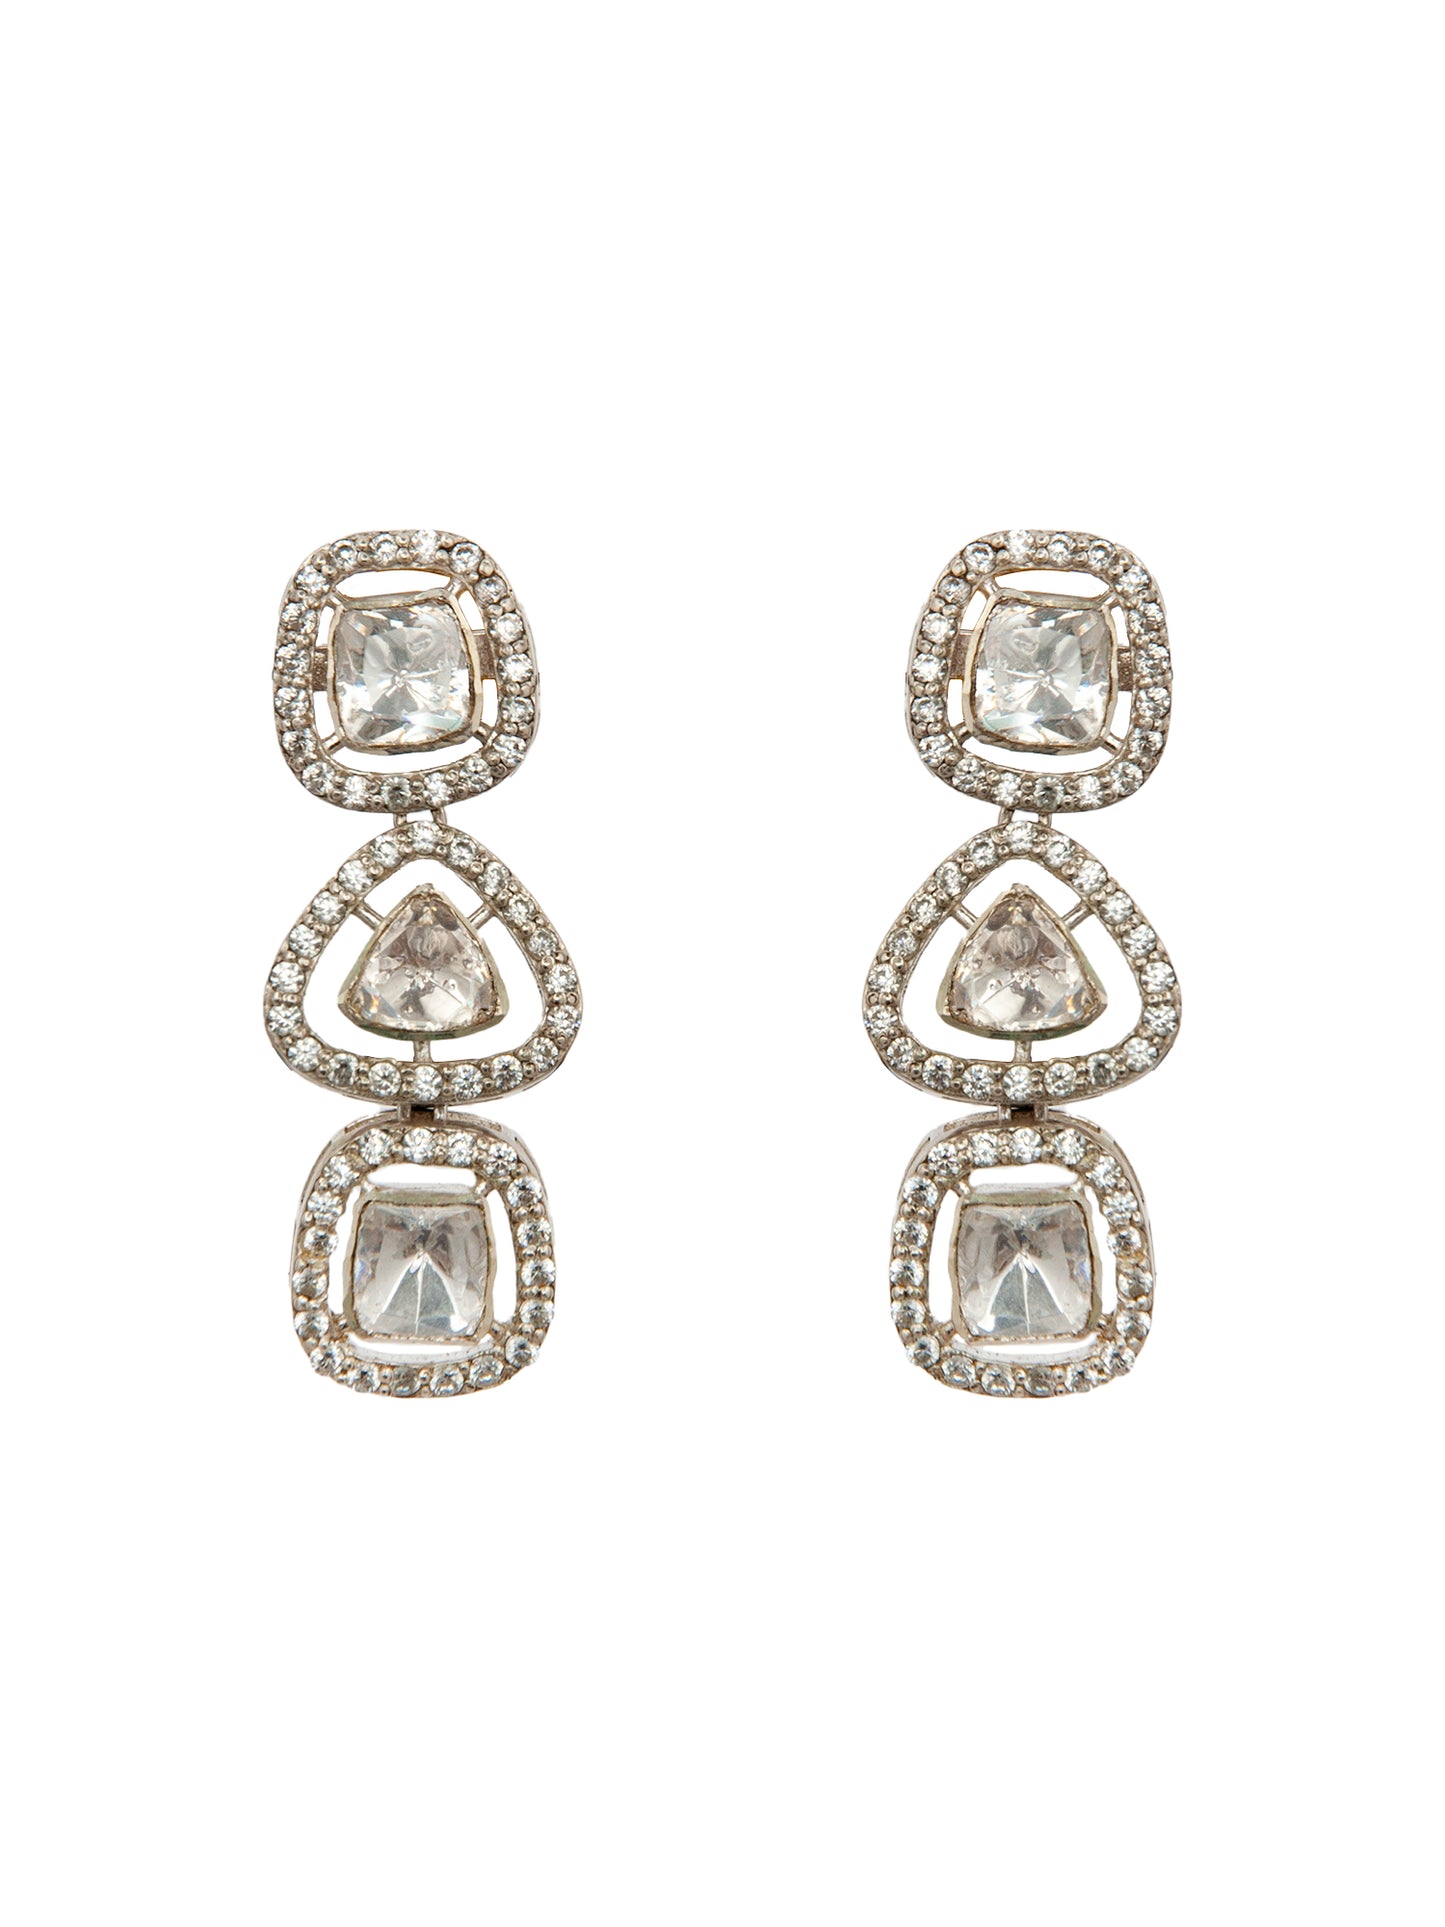 Sparkling Brilliance : 925 Sterling Silver Earrings with Moissanite and CZ